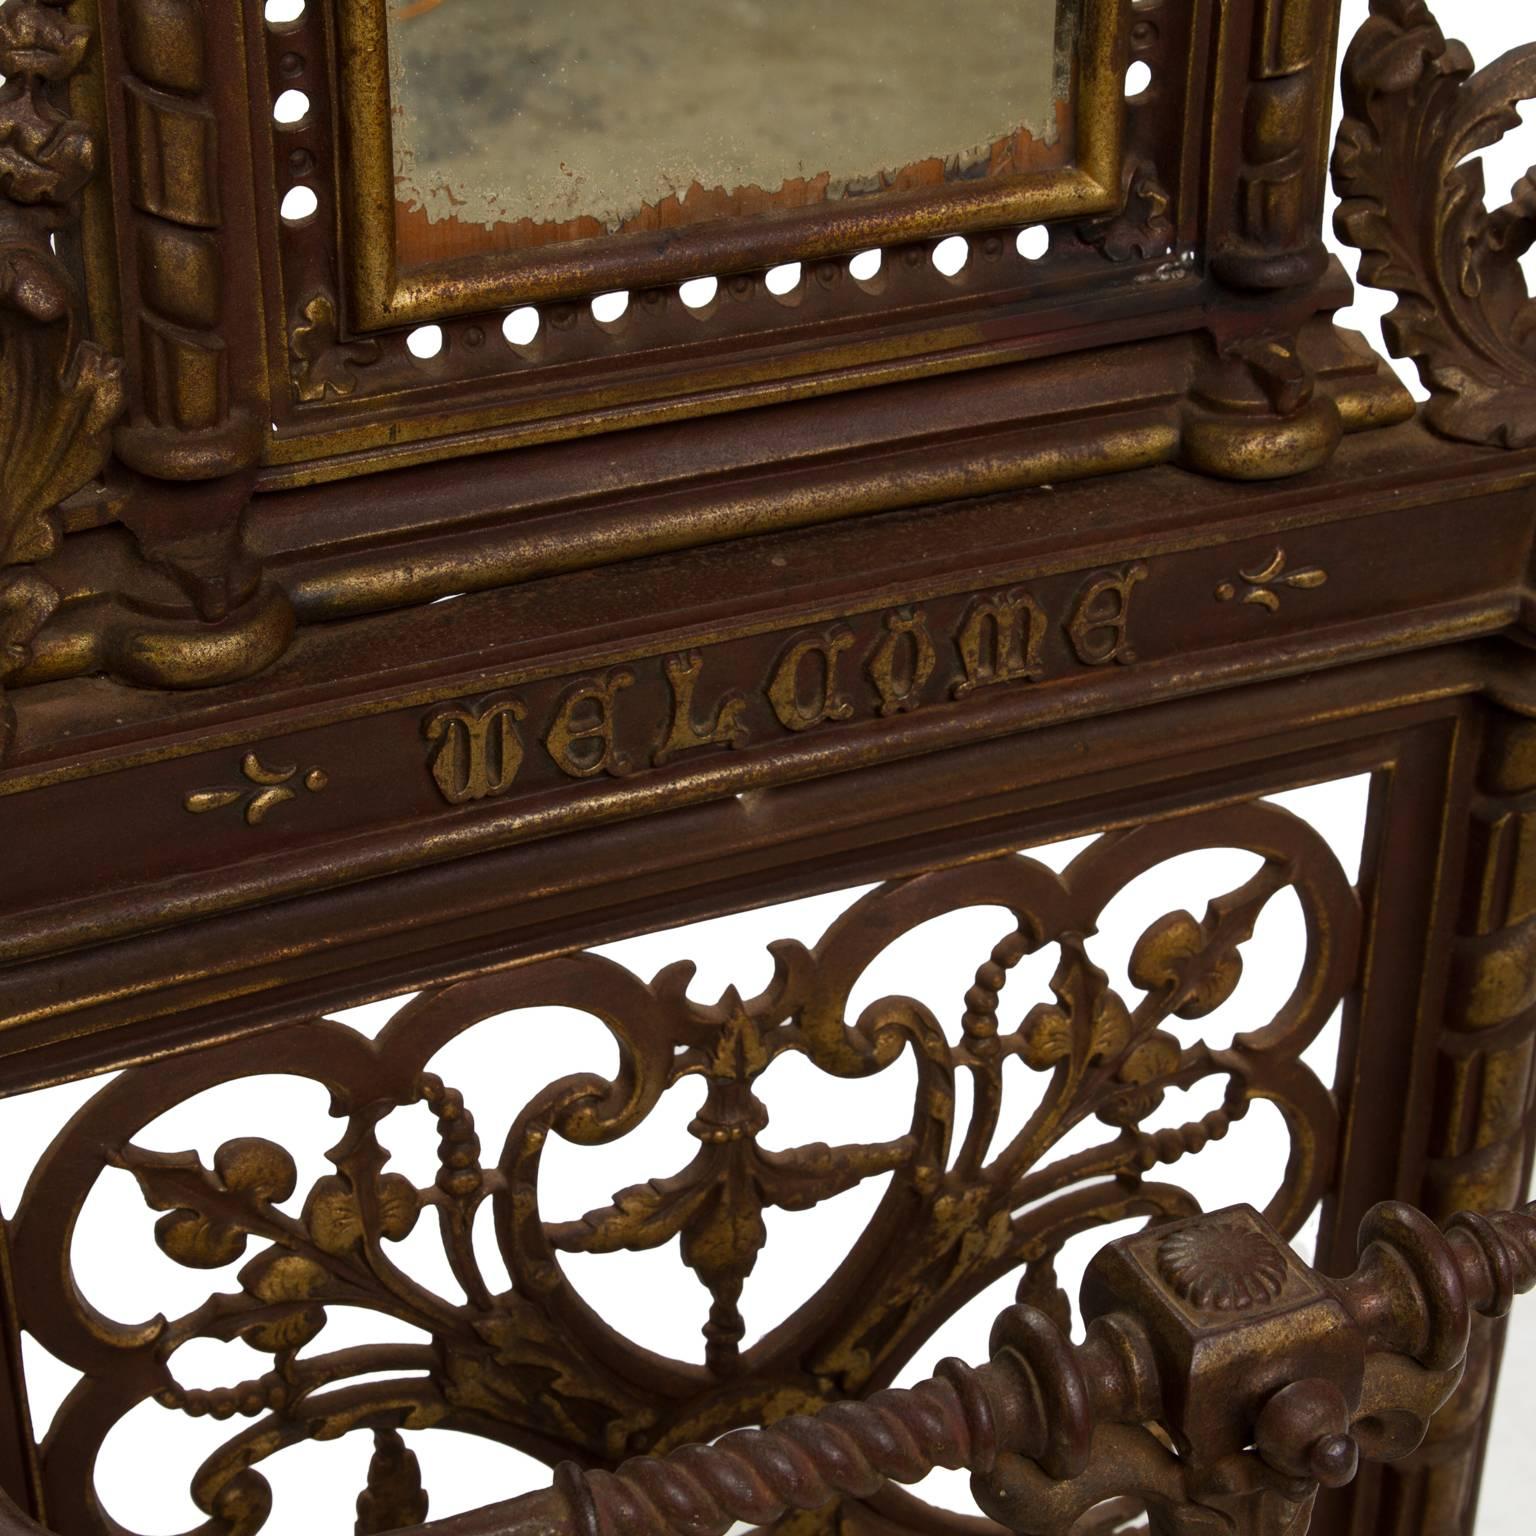 A handsome 19th century cast iron hall tree from England. There are six hooks surrounding an arched mirror. Wonderful scroll details including an lions mask, floral swags and the word welcome below the mirror. Great color and sturdy. One hook has